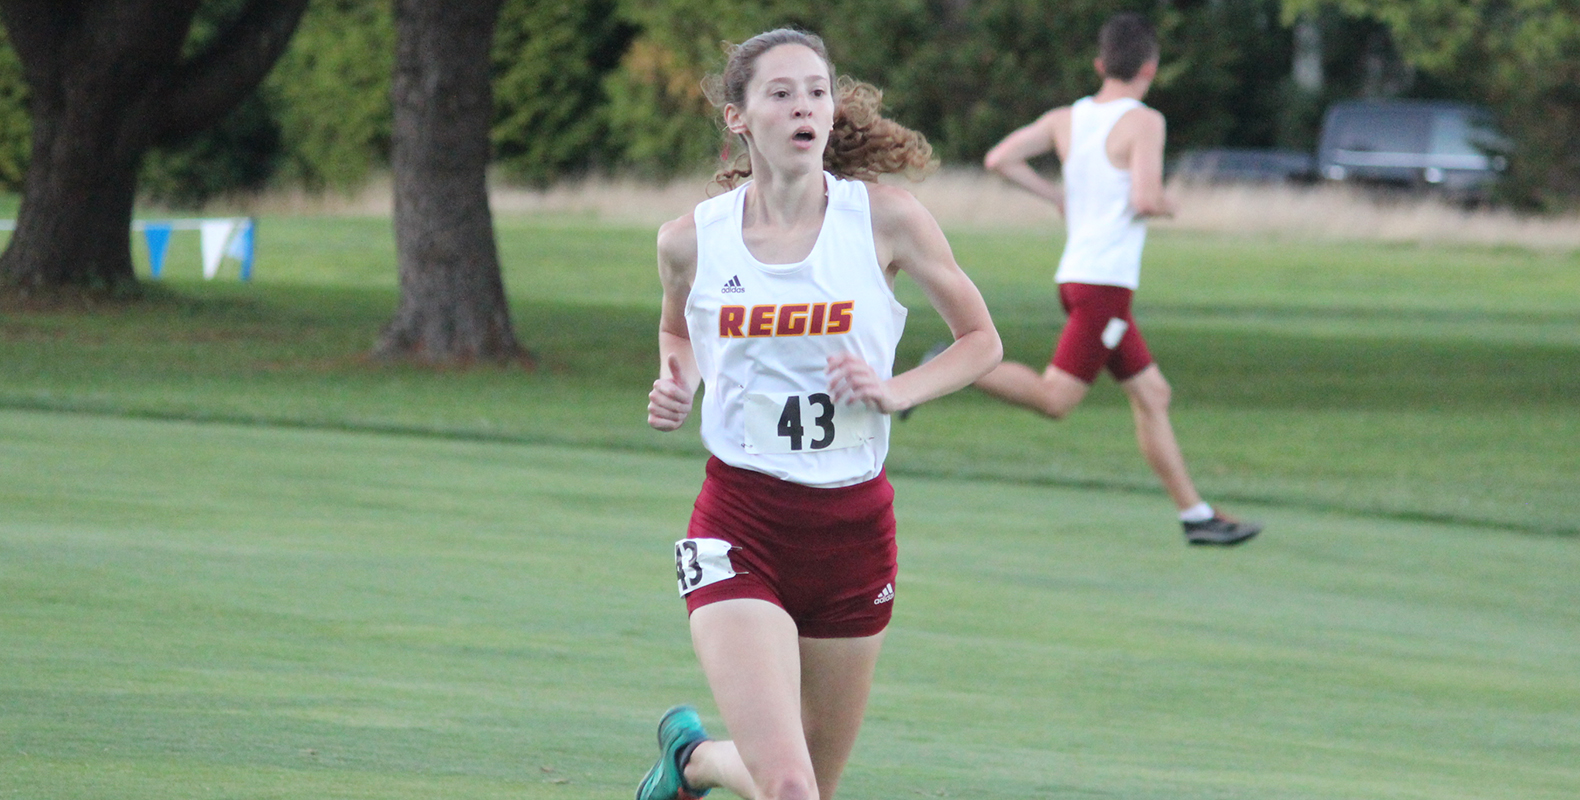 Cross Country Faces Strong Competition at UMass Dartmouth Invite